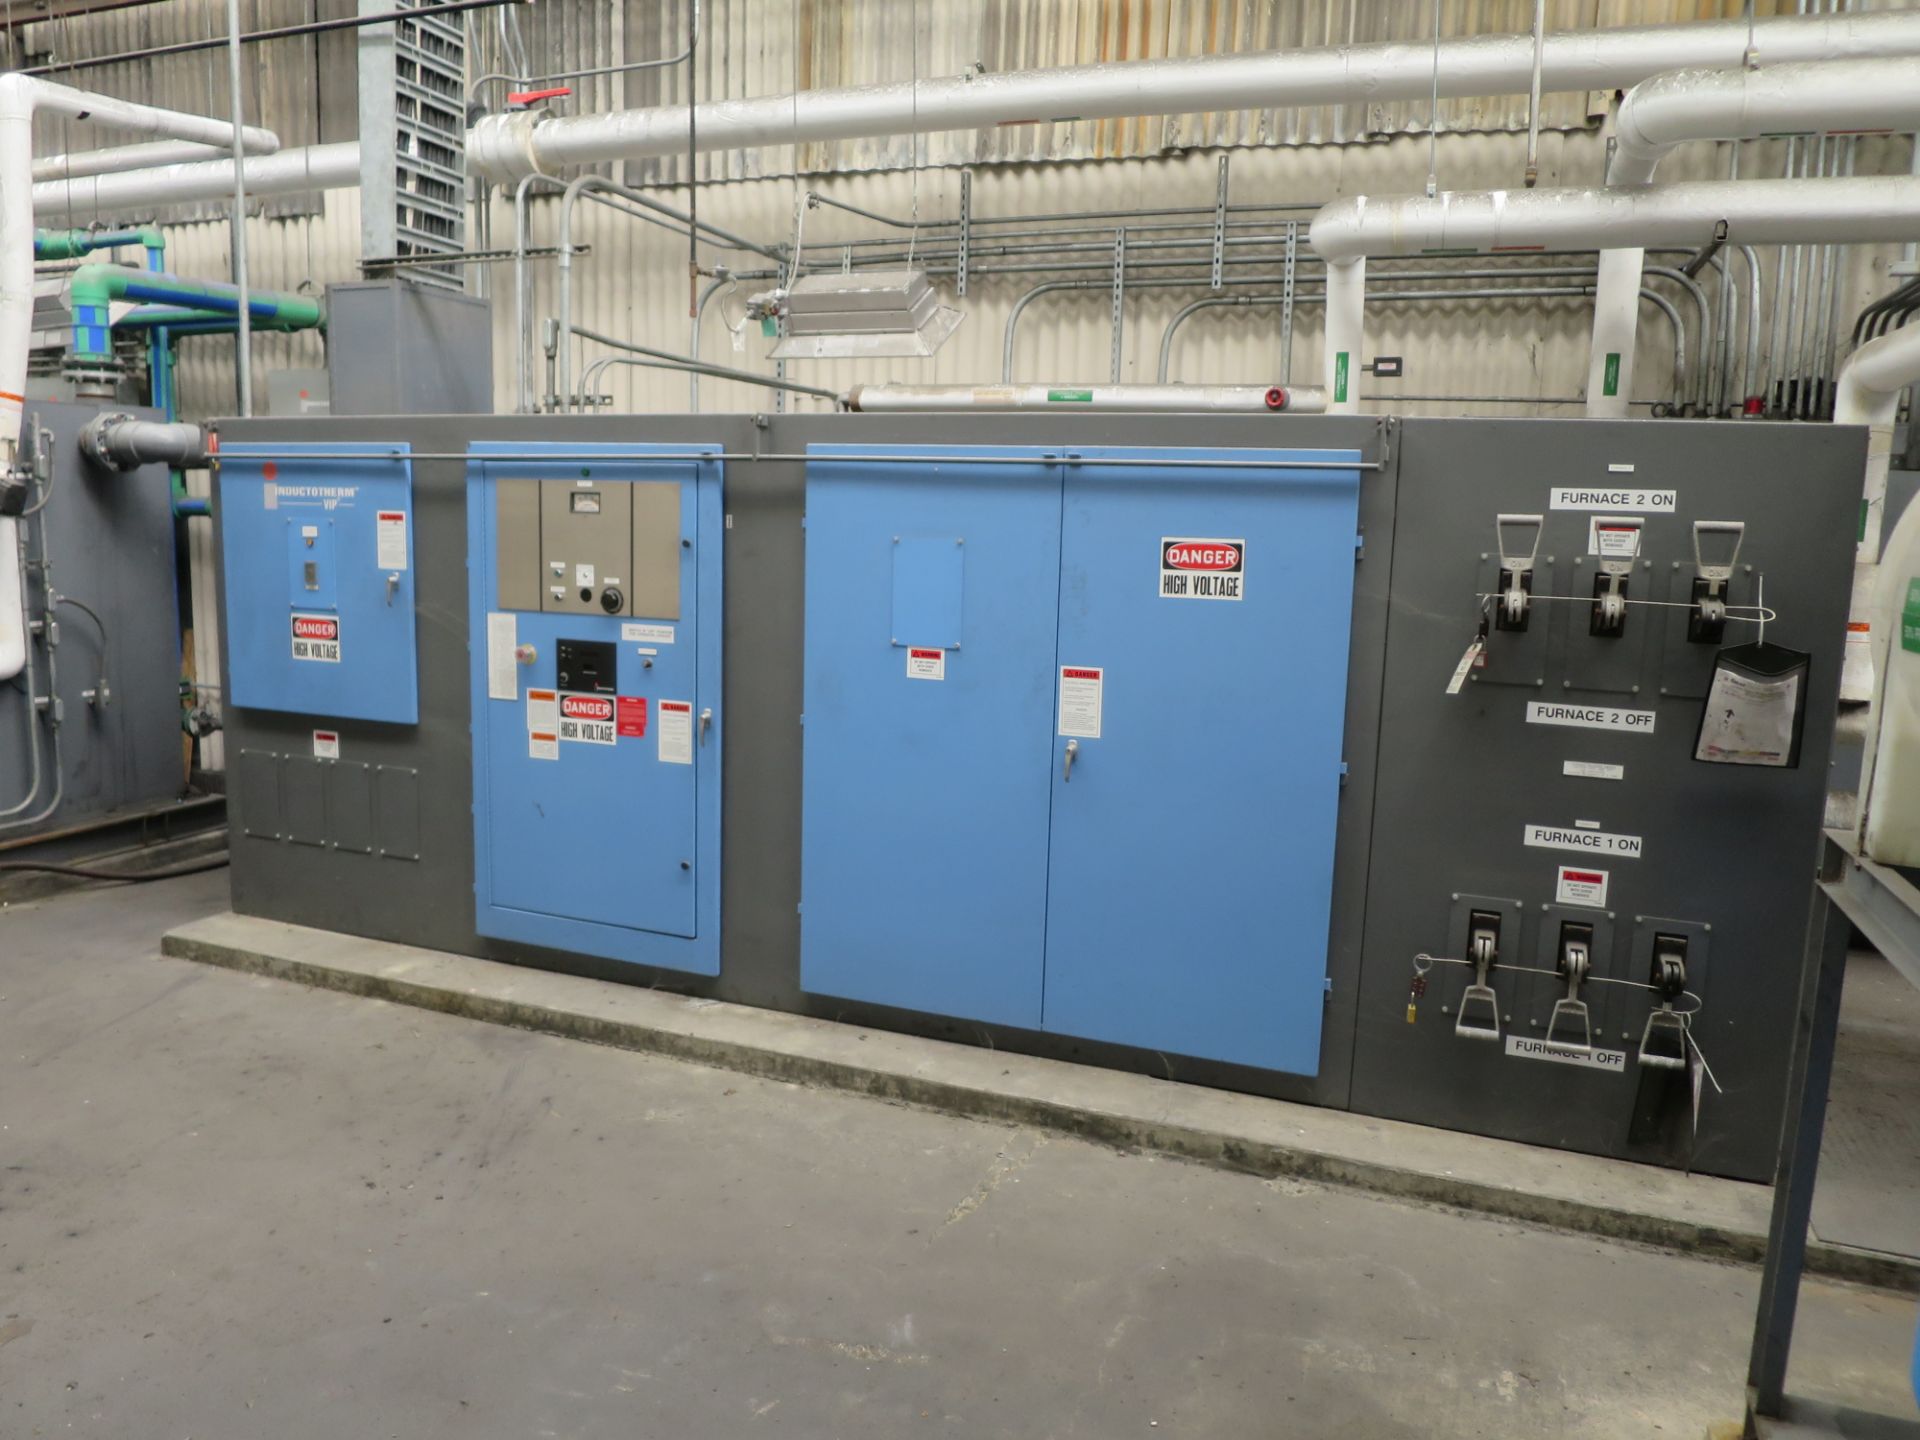 Inductotherm VIP control panel, s/n 10G-259809-246-11, Supply: 1359 KVA, 3 Phase, 60 HZ, 575 Vac,